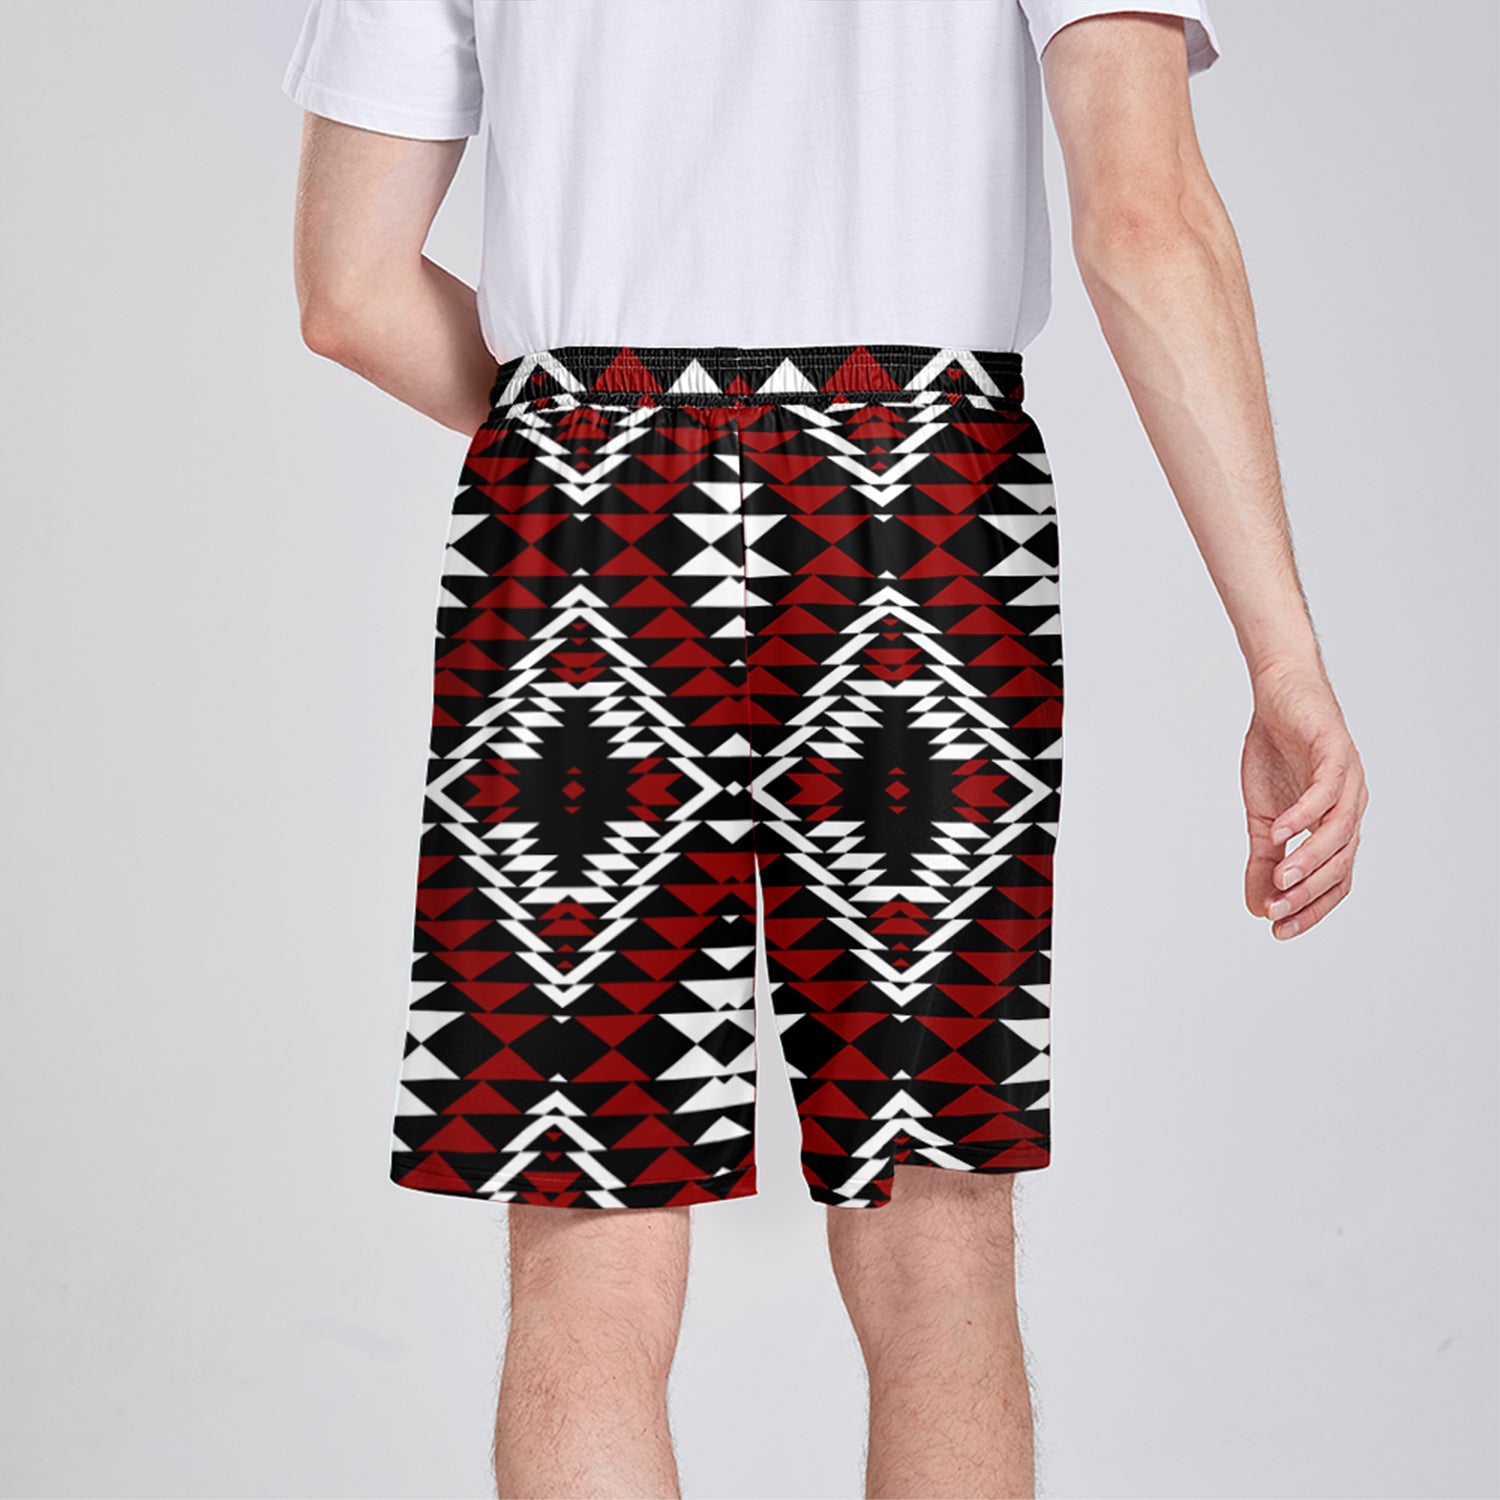 Taos Wool Athletic Shorts with Pockets